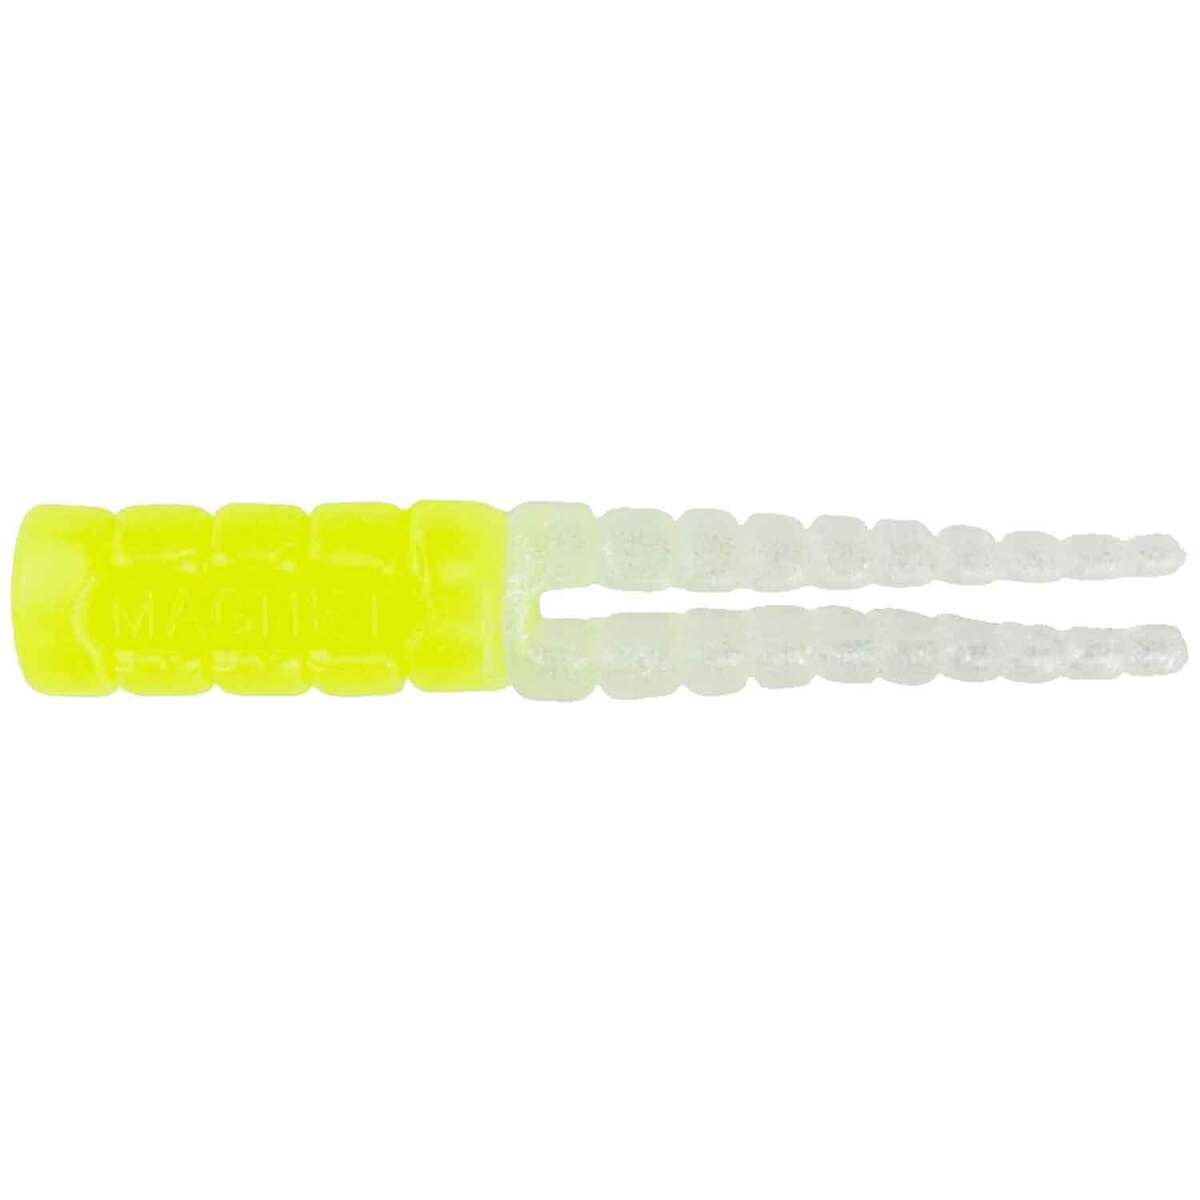 LELAND LURES CRAPPIE MAGNET 15PC BODY PACKS